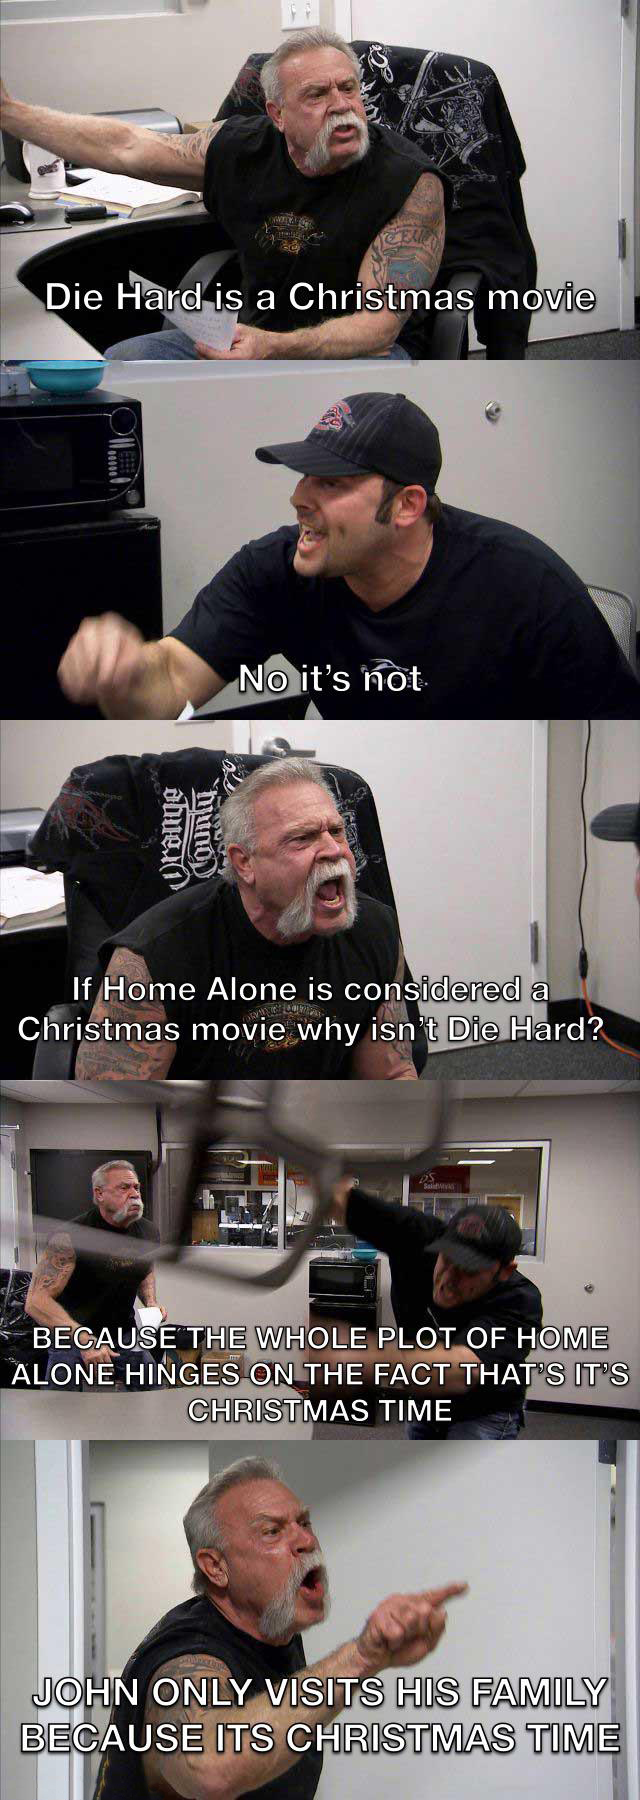 american chopper argument - Die Hard is a Christmas movie No it's not dhue 1 County If Home Alone is considered a Christmas movie why isn't Die Hard? 22 Sale Because The Whole Plot Of Home Alone Hinges On The Fact That'S It'S Christmas Time John Only Visi